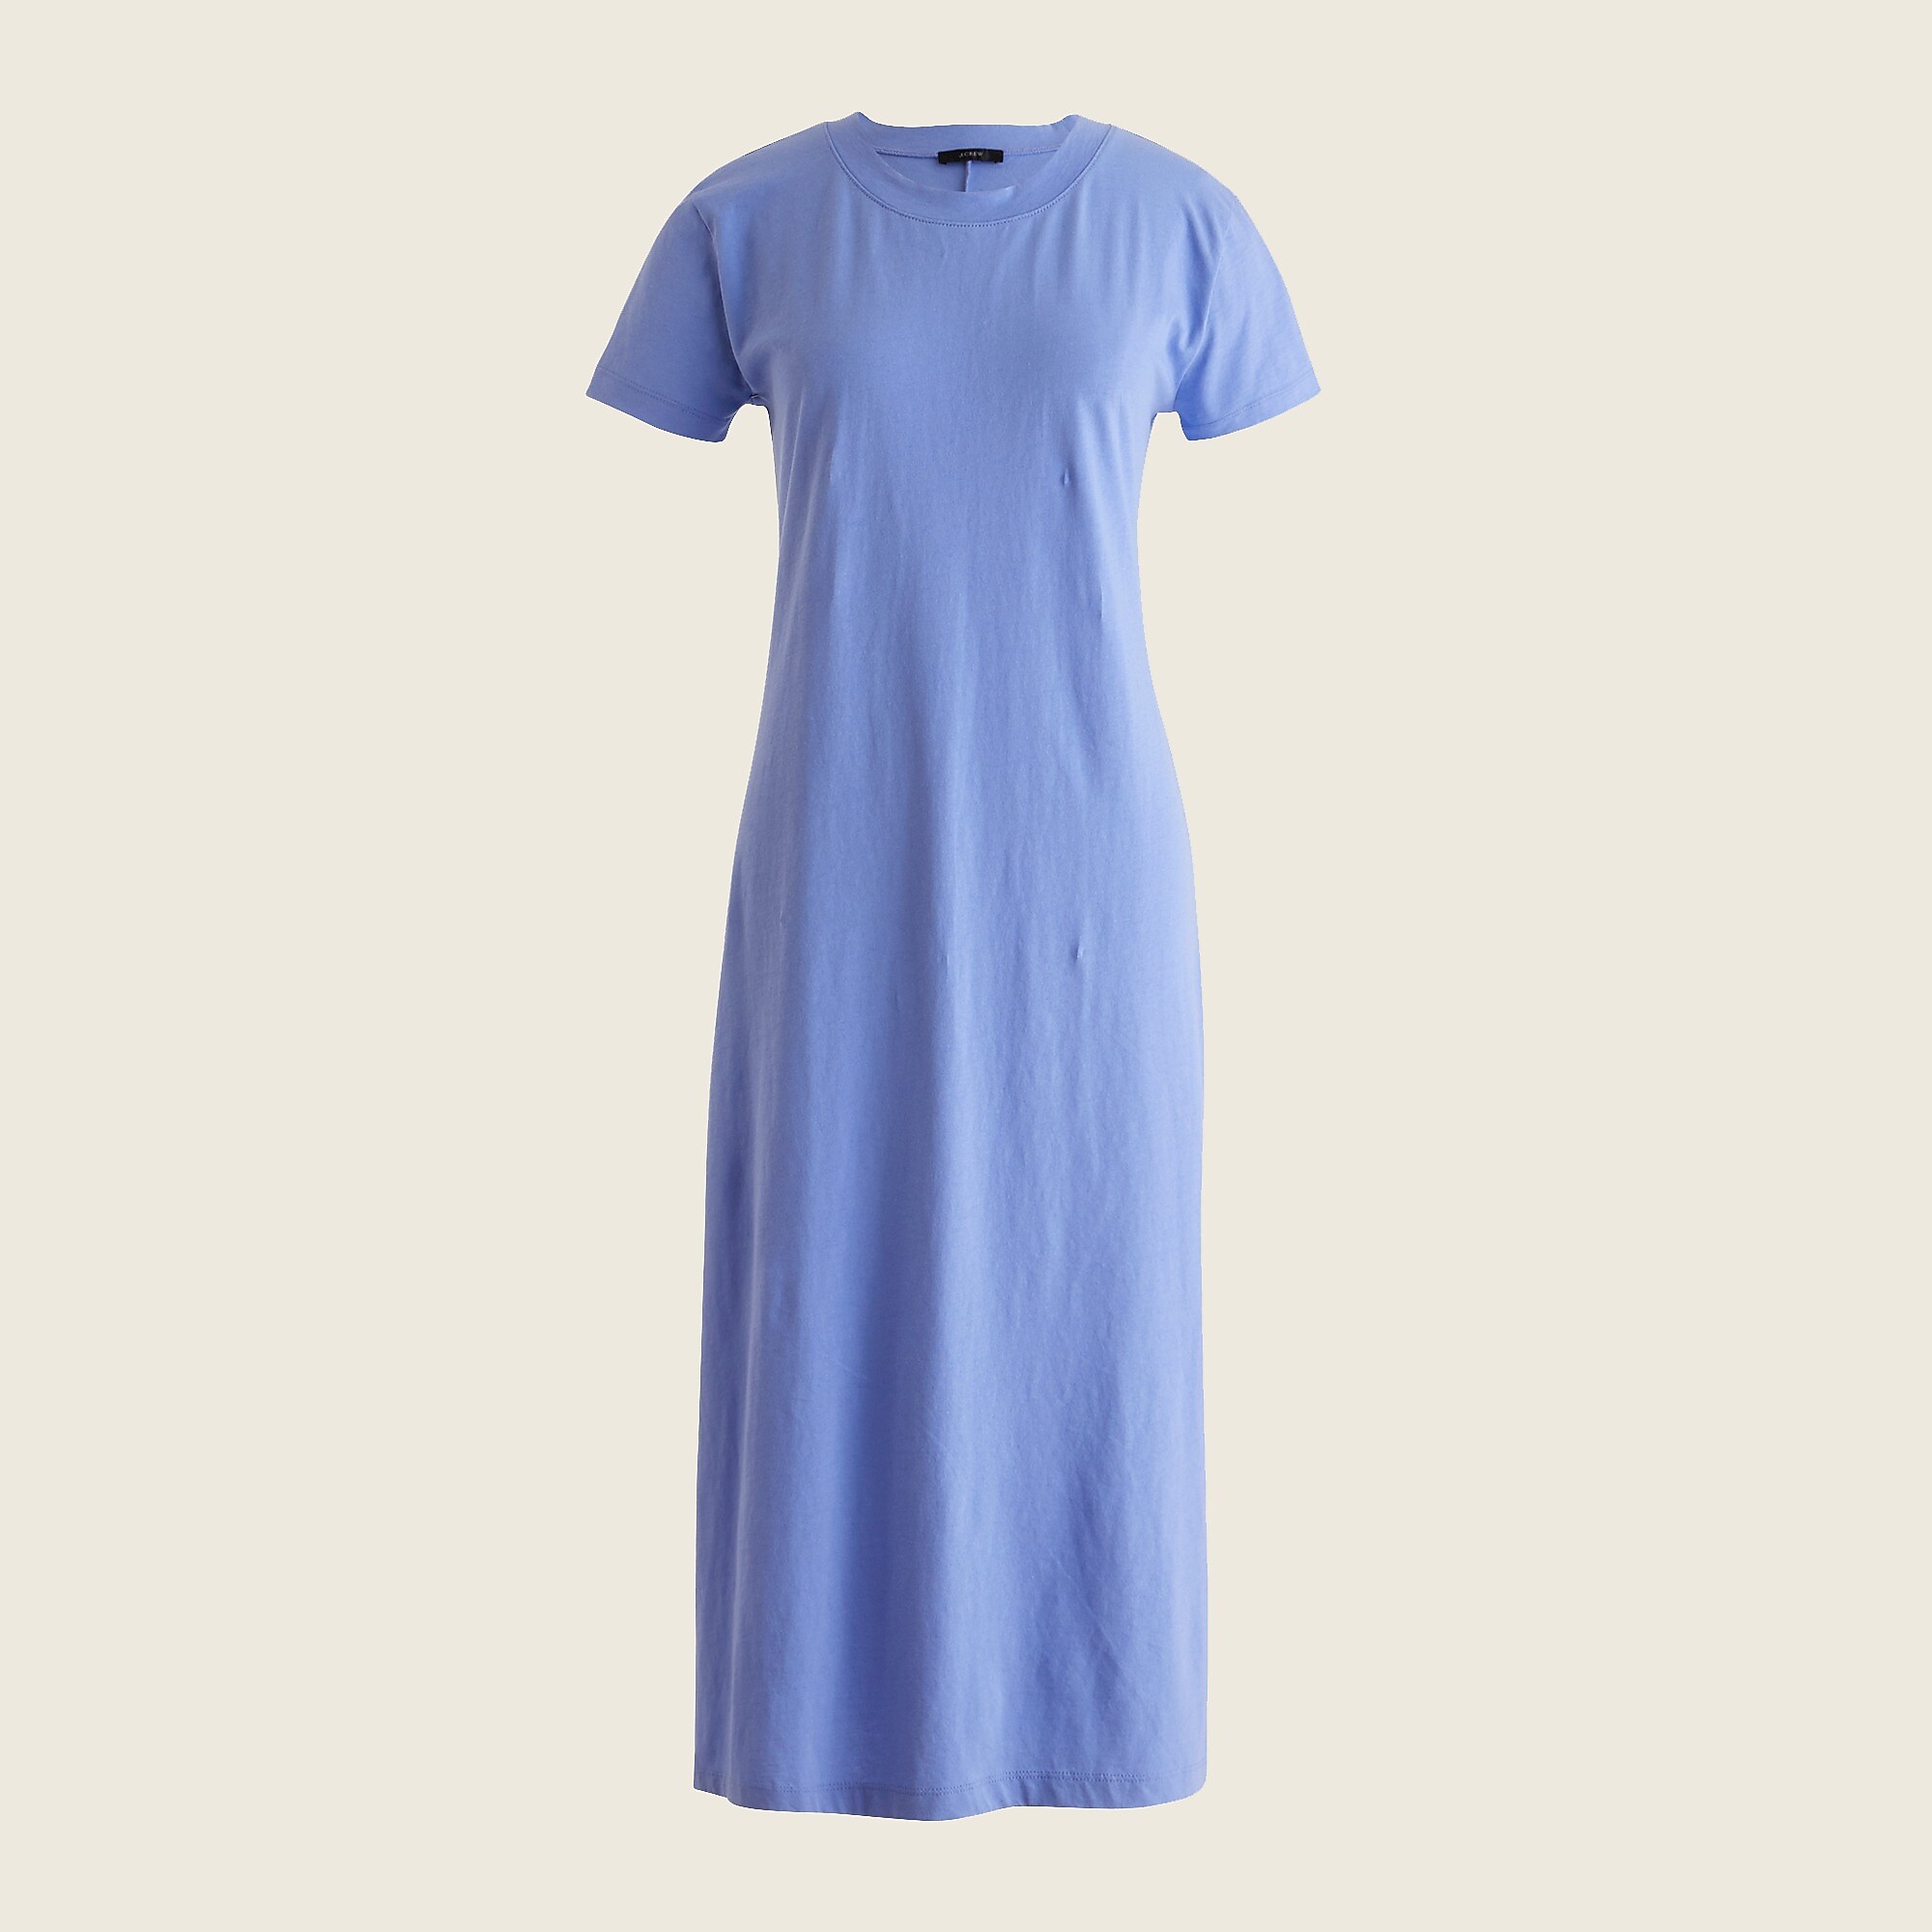 Featured image of post White T Shirt Dress Ladies / It lends an air of purity and openness.